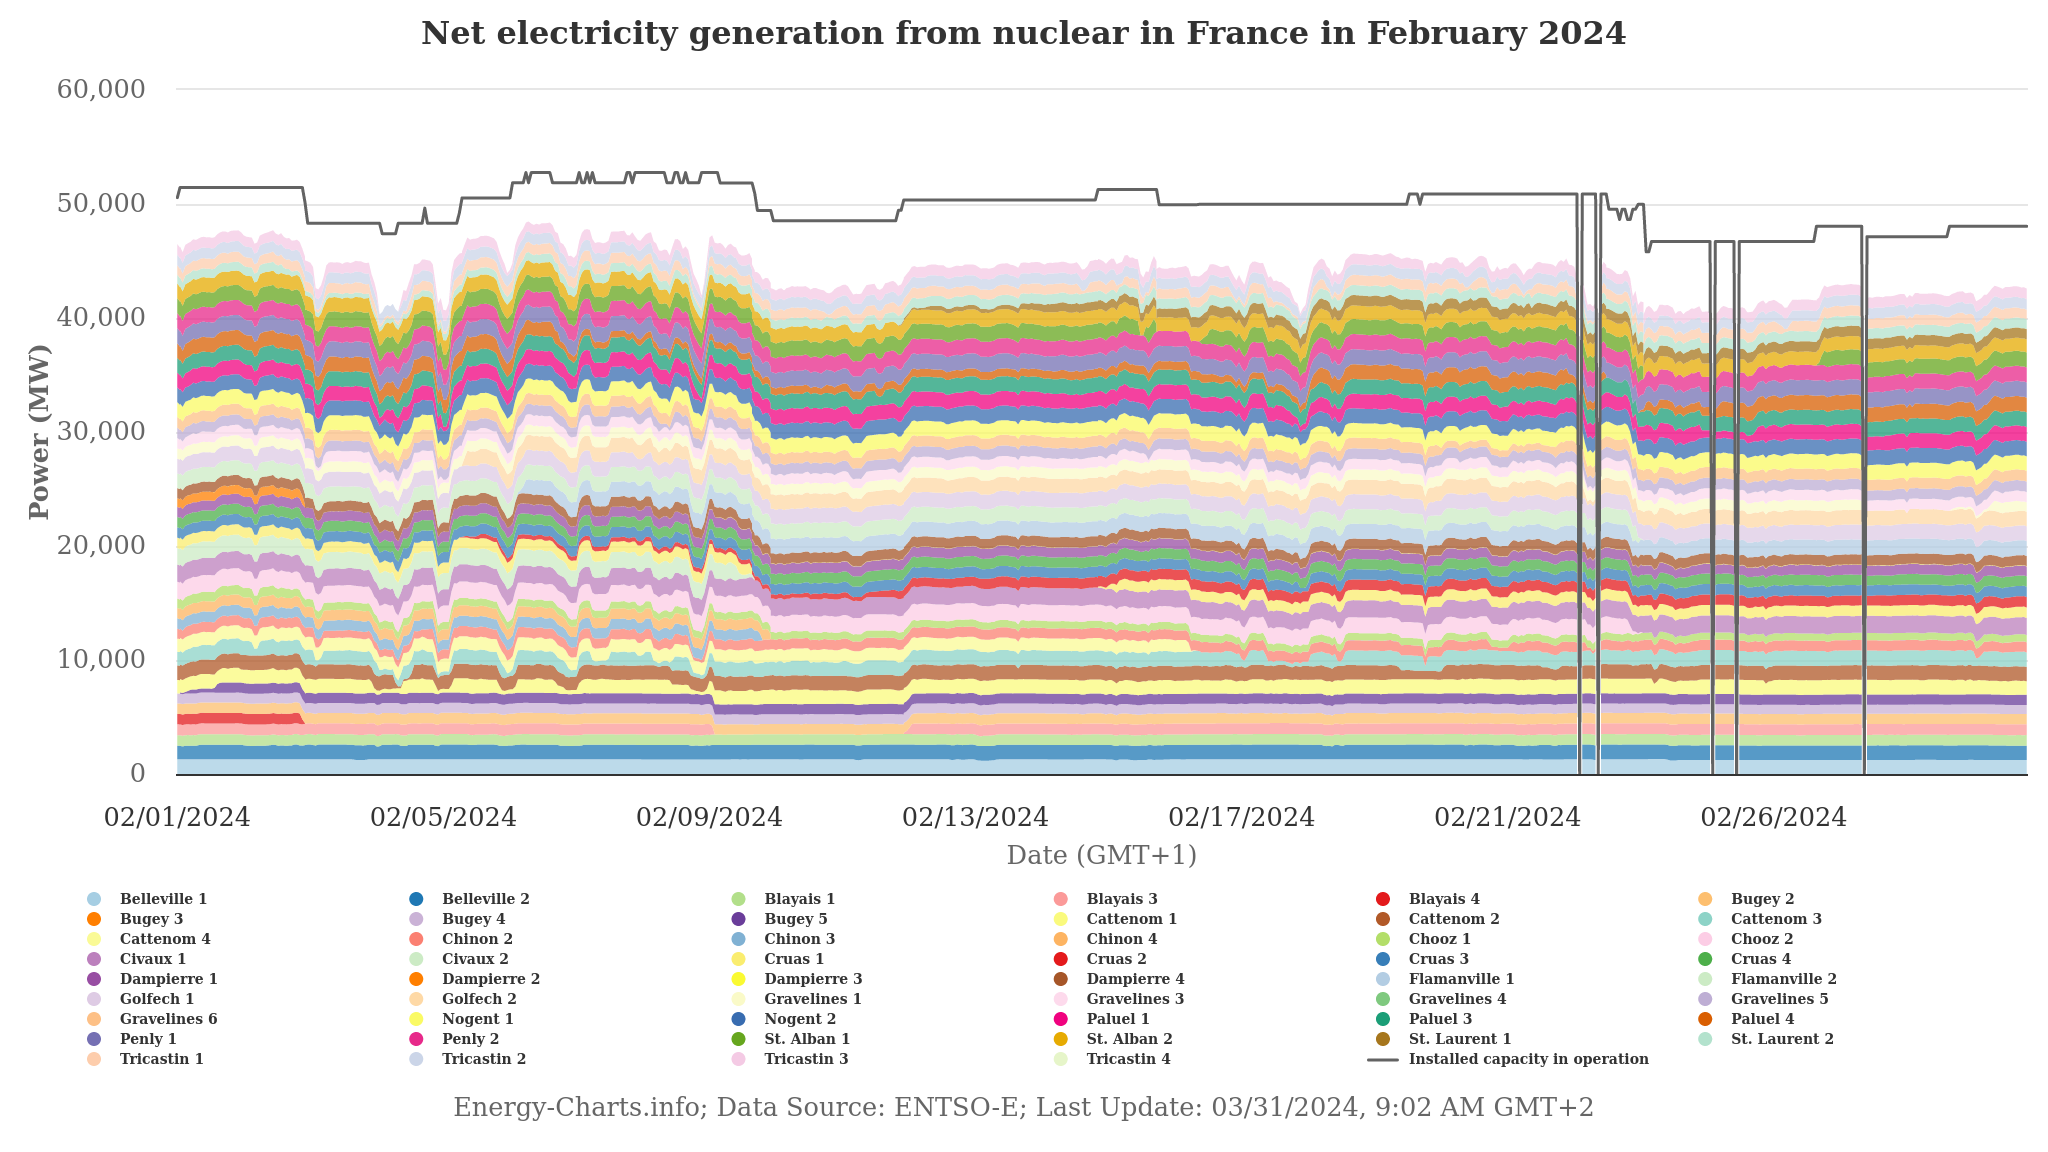 energy-charts_Net_electricity_generation_from_nuclear_in_France_in_February_2024.png